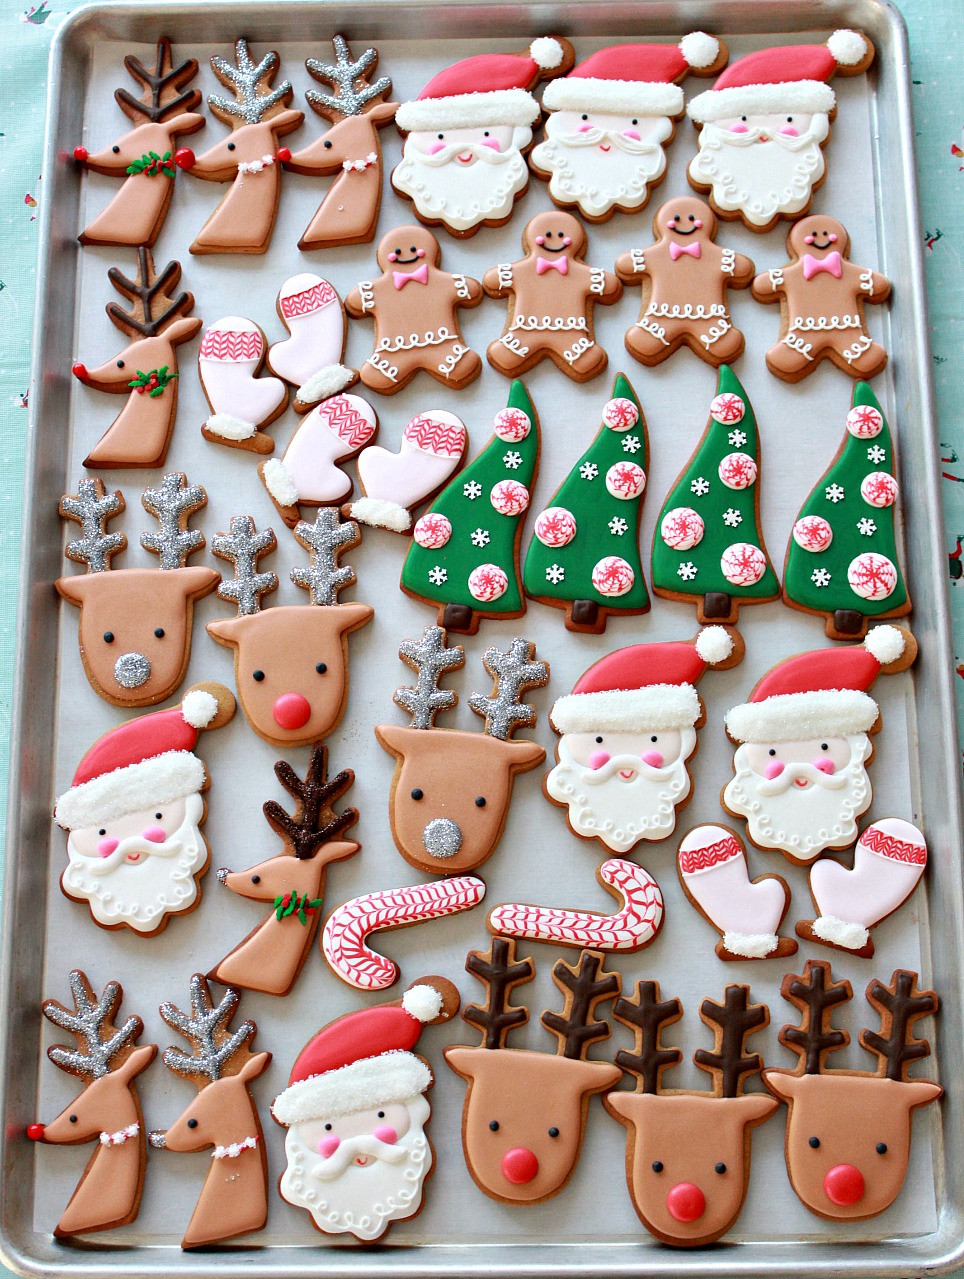 Pictures Of Christmas Cookies Decorated
 Video How to Decorate Christmas Cookies Simple Designs